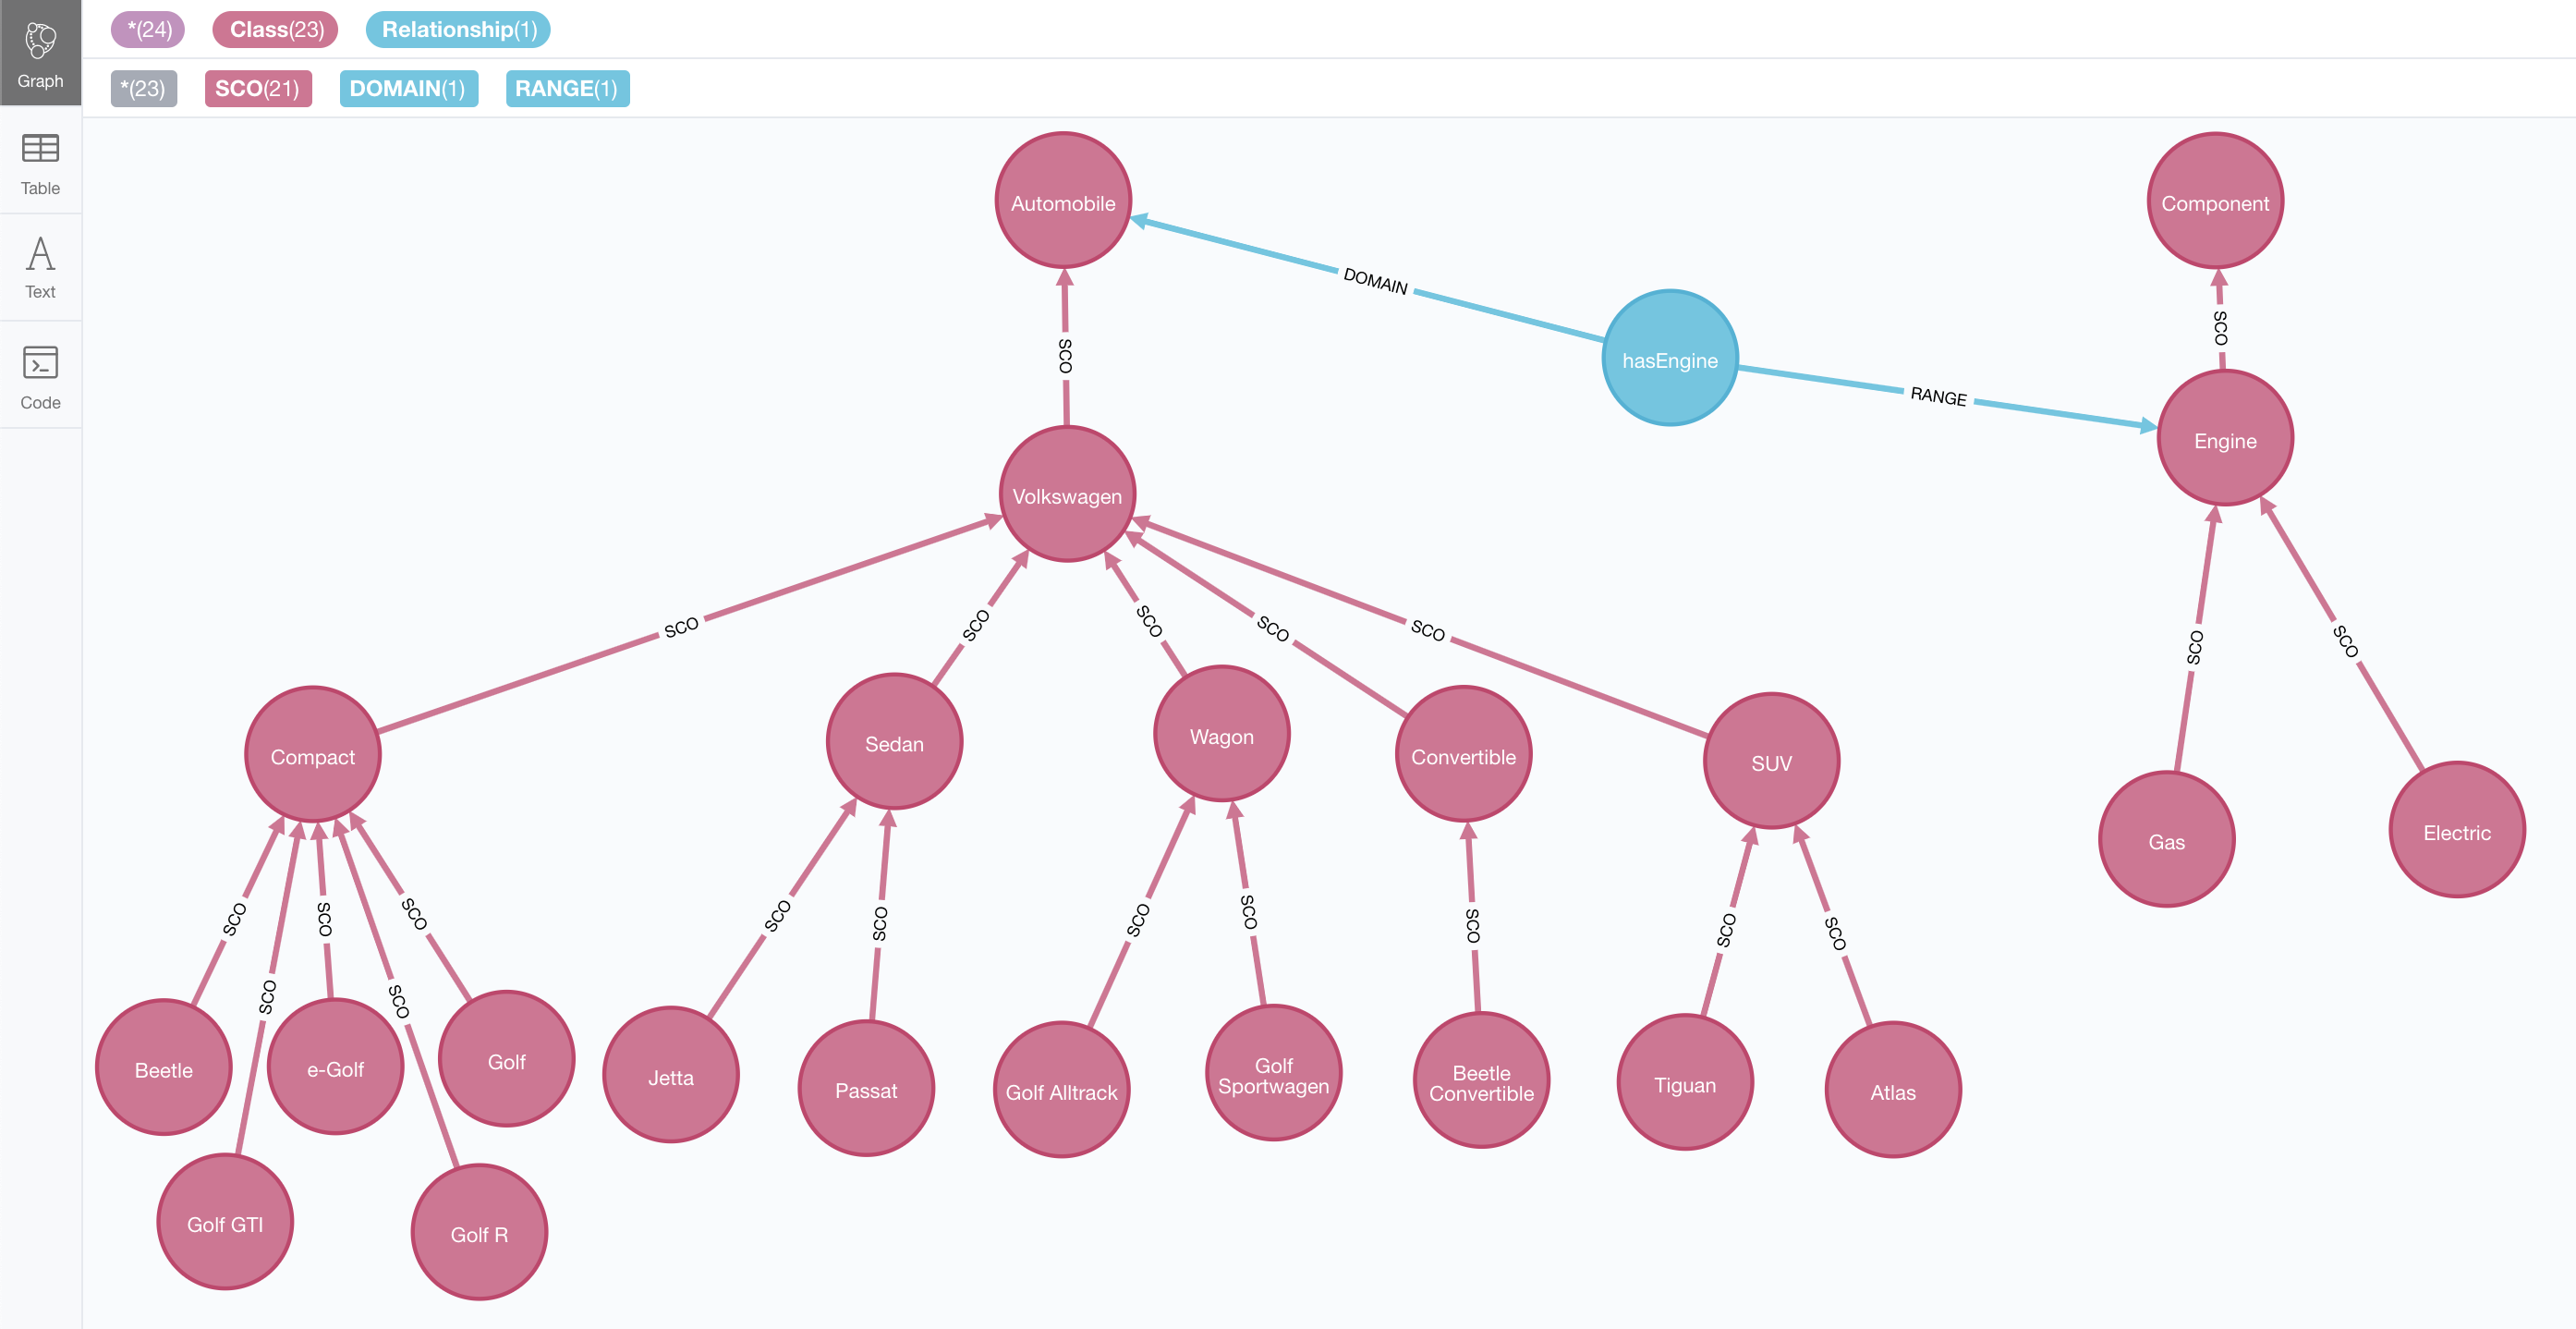 VW ontology imported in Neo4j